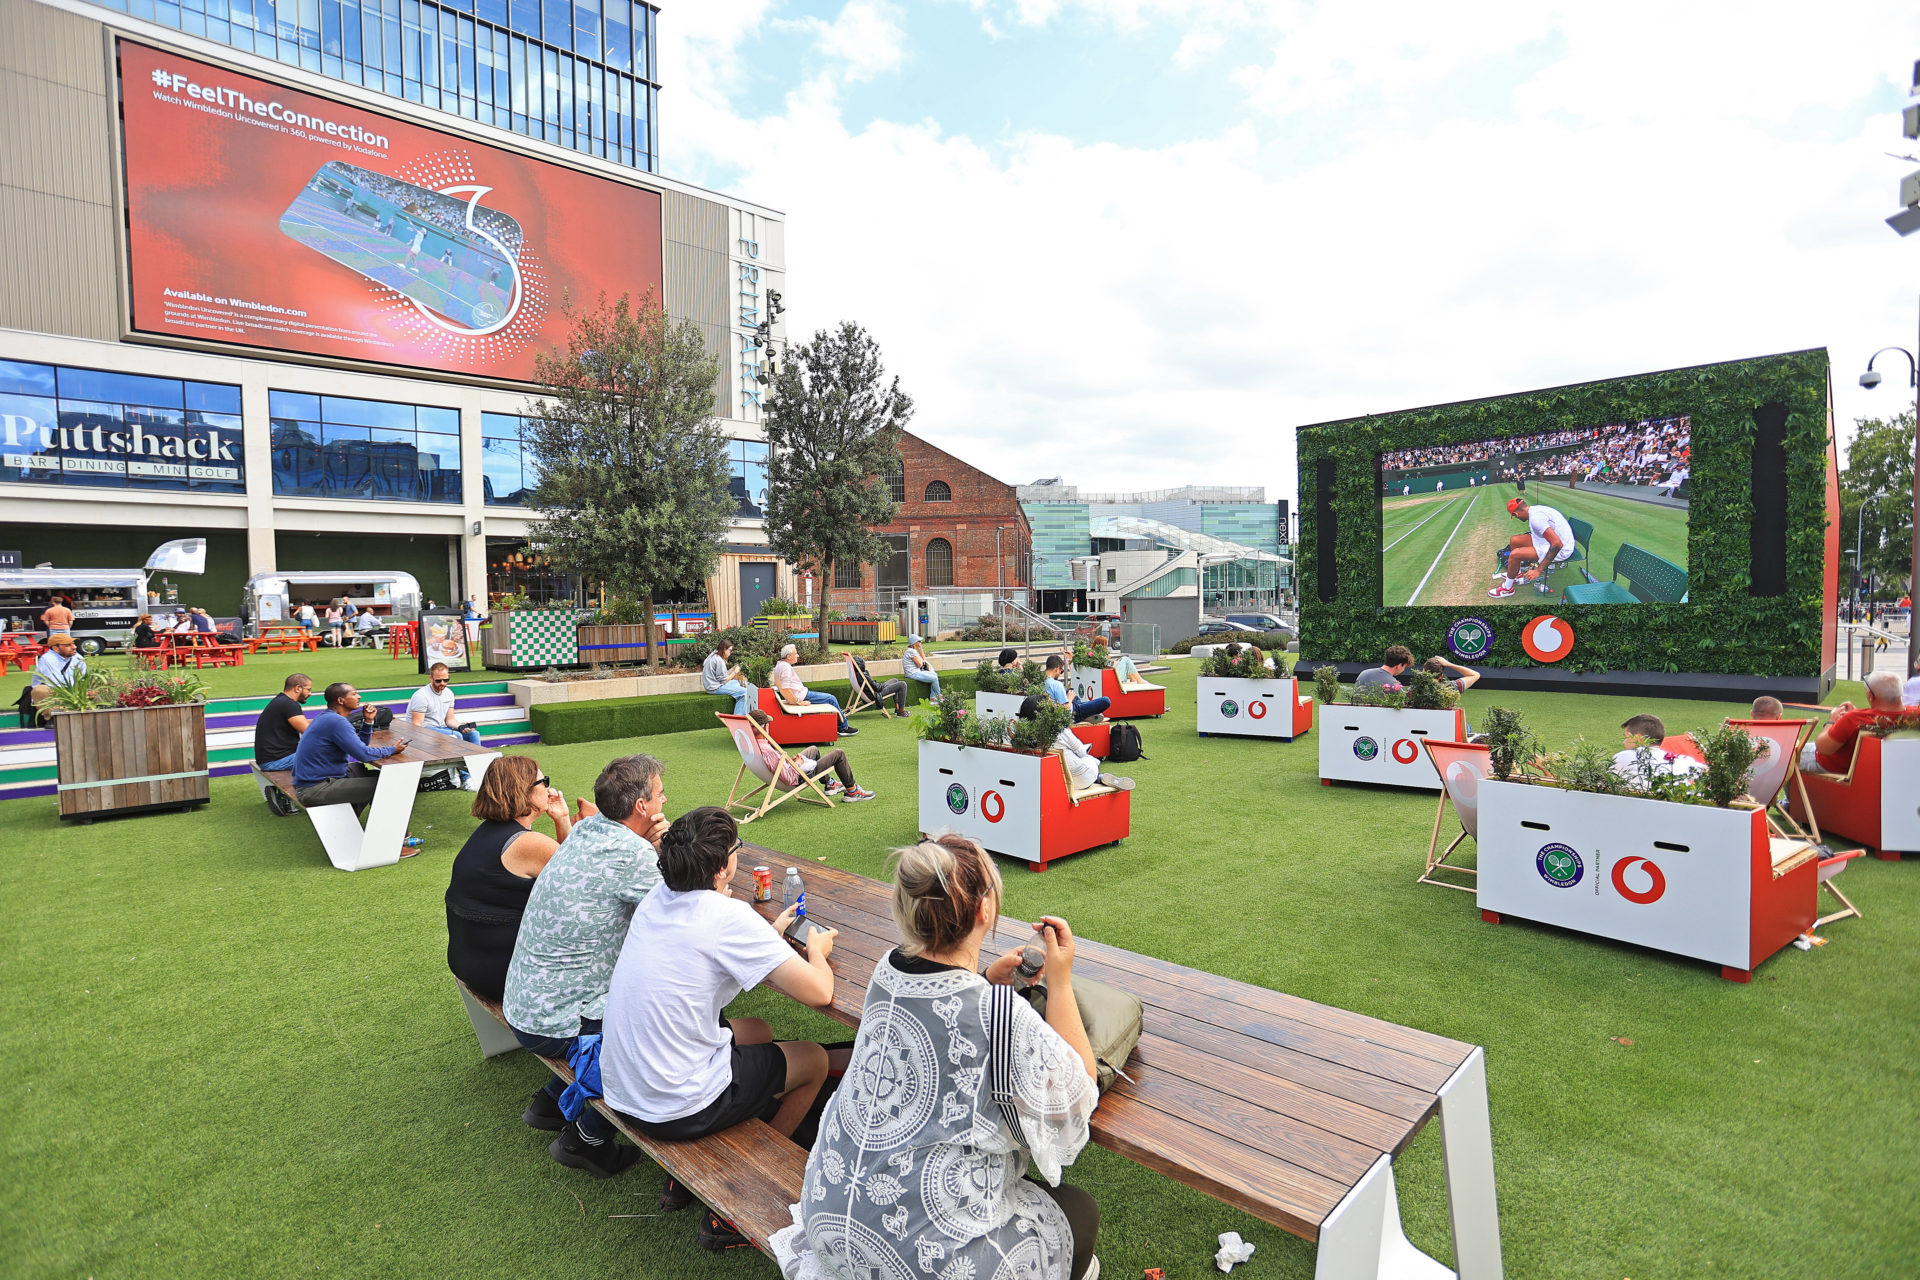 Ocean Outdoor brings Wimbledon Experience to W12 and SW11 